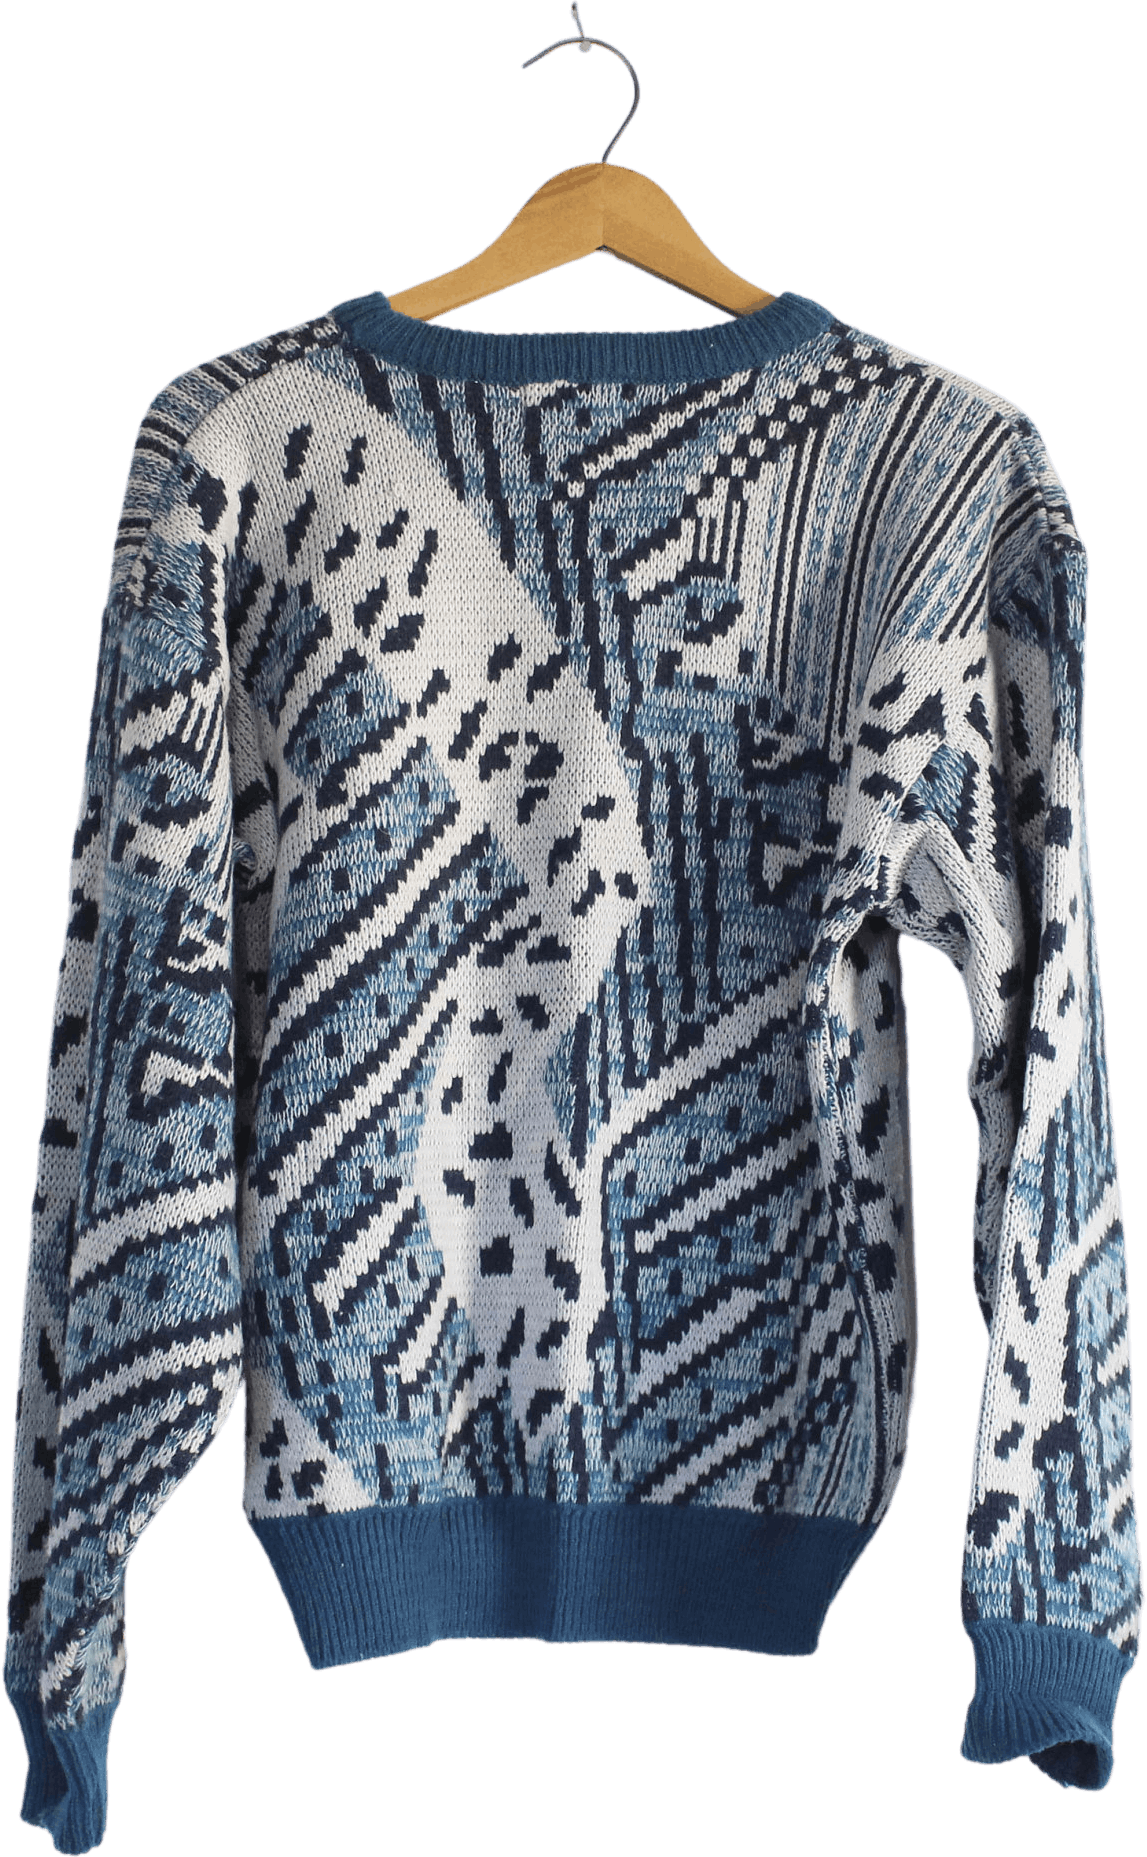 Vintage White and Blue Abstract Patterned Acrylic Crewneck Sweatshirt ...